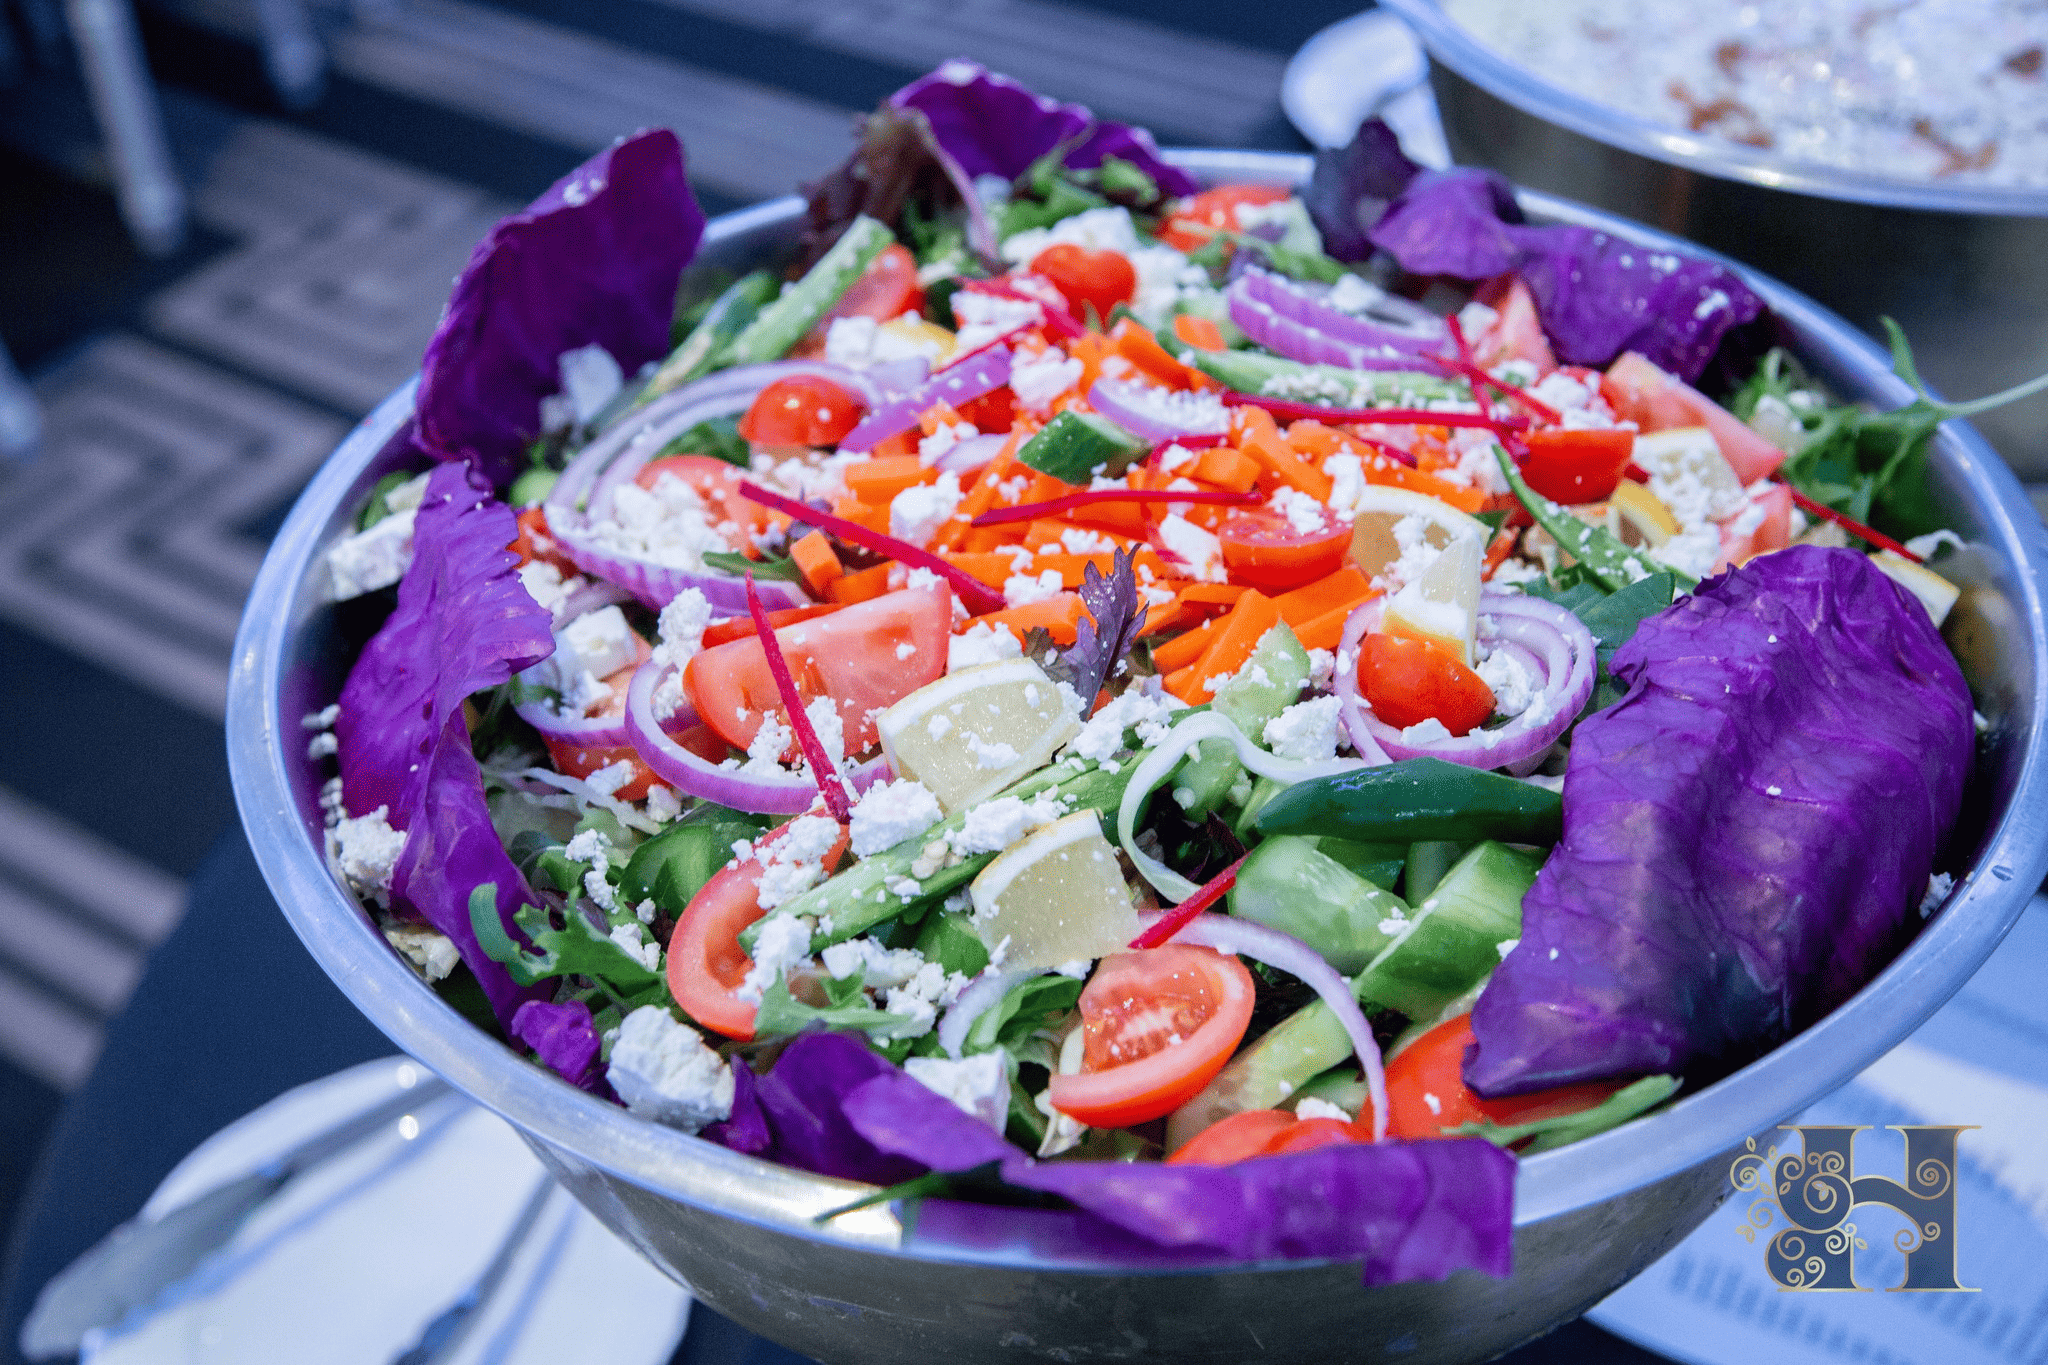 Fresh and colorful homemade salad with a mix of vibrant vegetables, greens, and toppings.